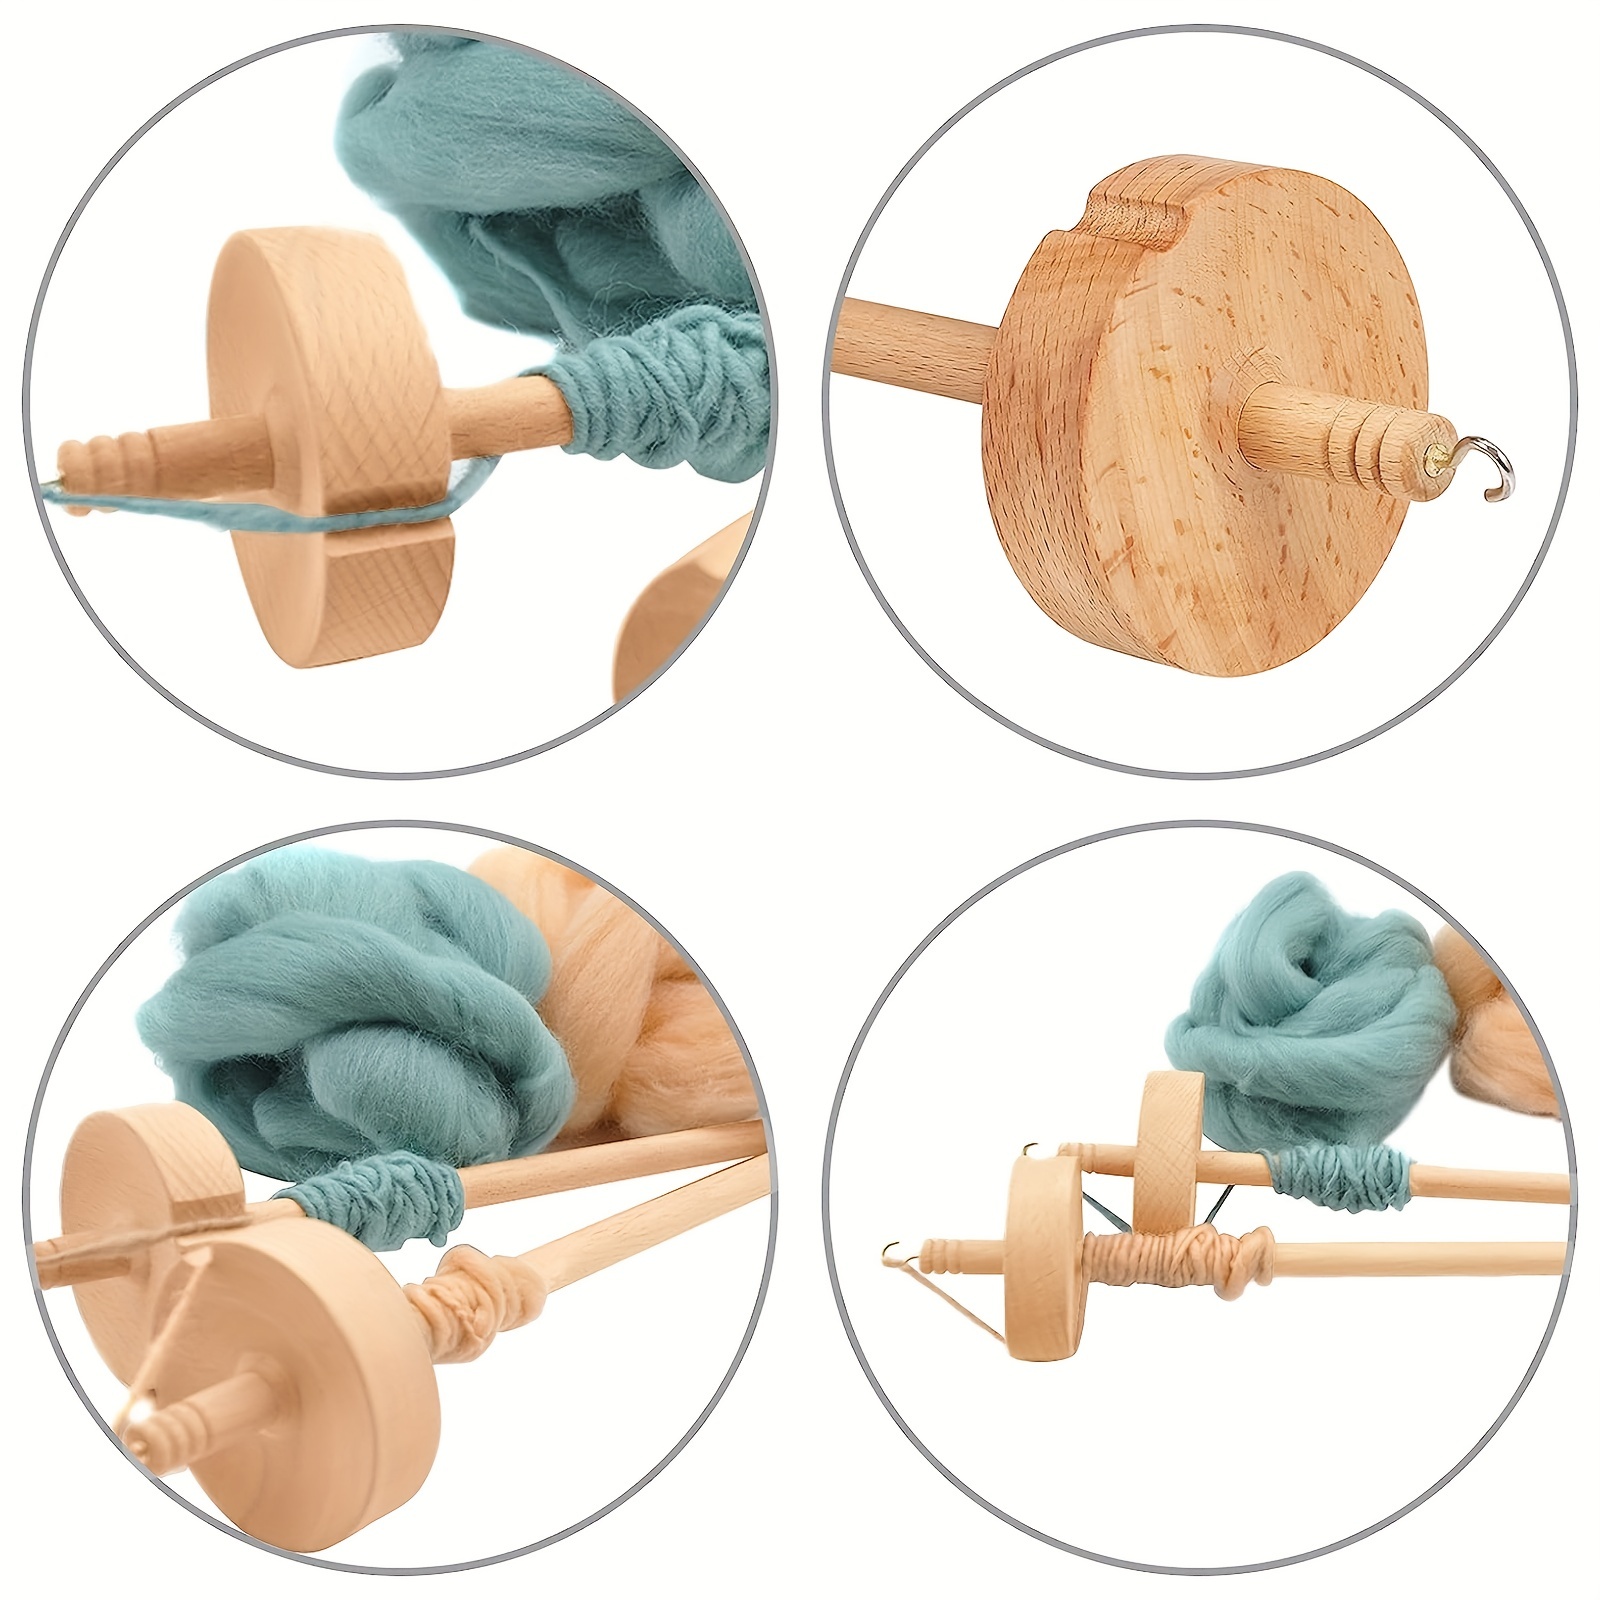 Drop spindling for beginners: which spindle and yarn to use